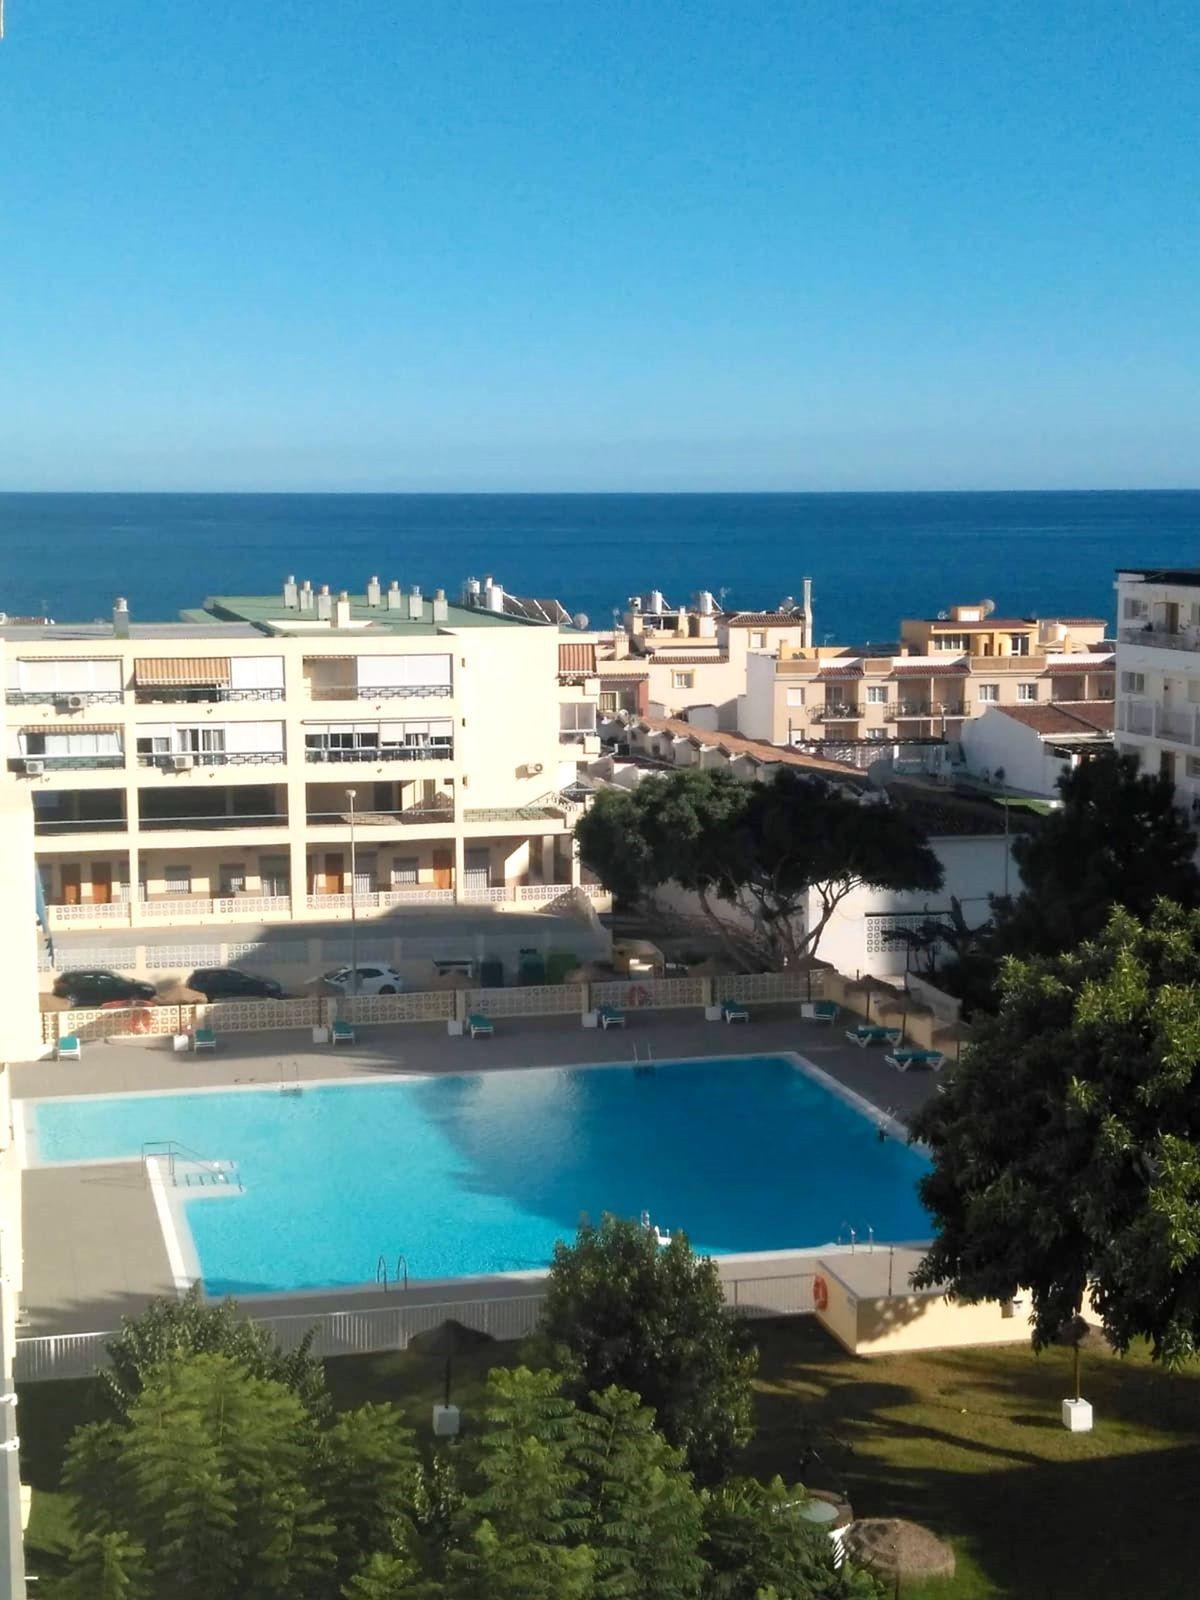 						Apartment  Middle Floor
													for sale 
																			 in La Carihuela
					